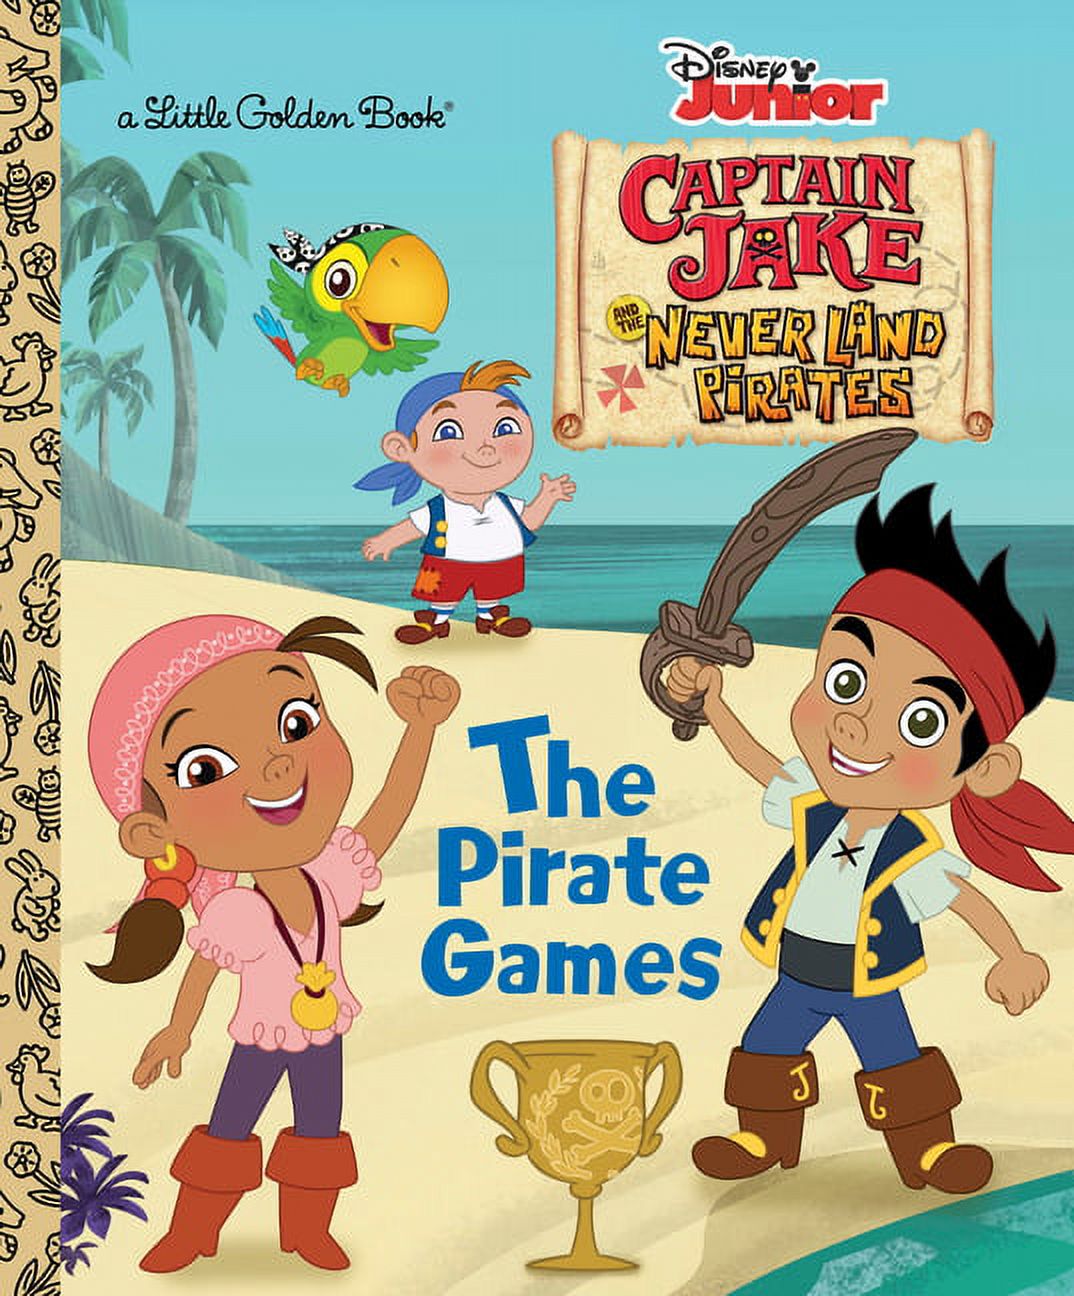 Little Golden Book: The Pirate Games (Disney Junior: Jake and the Neverland Pirates) (Hardcover) - image 1 of 1